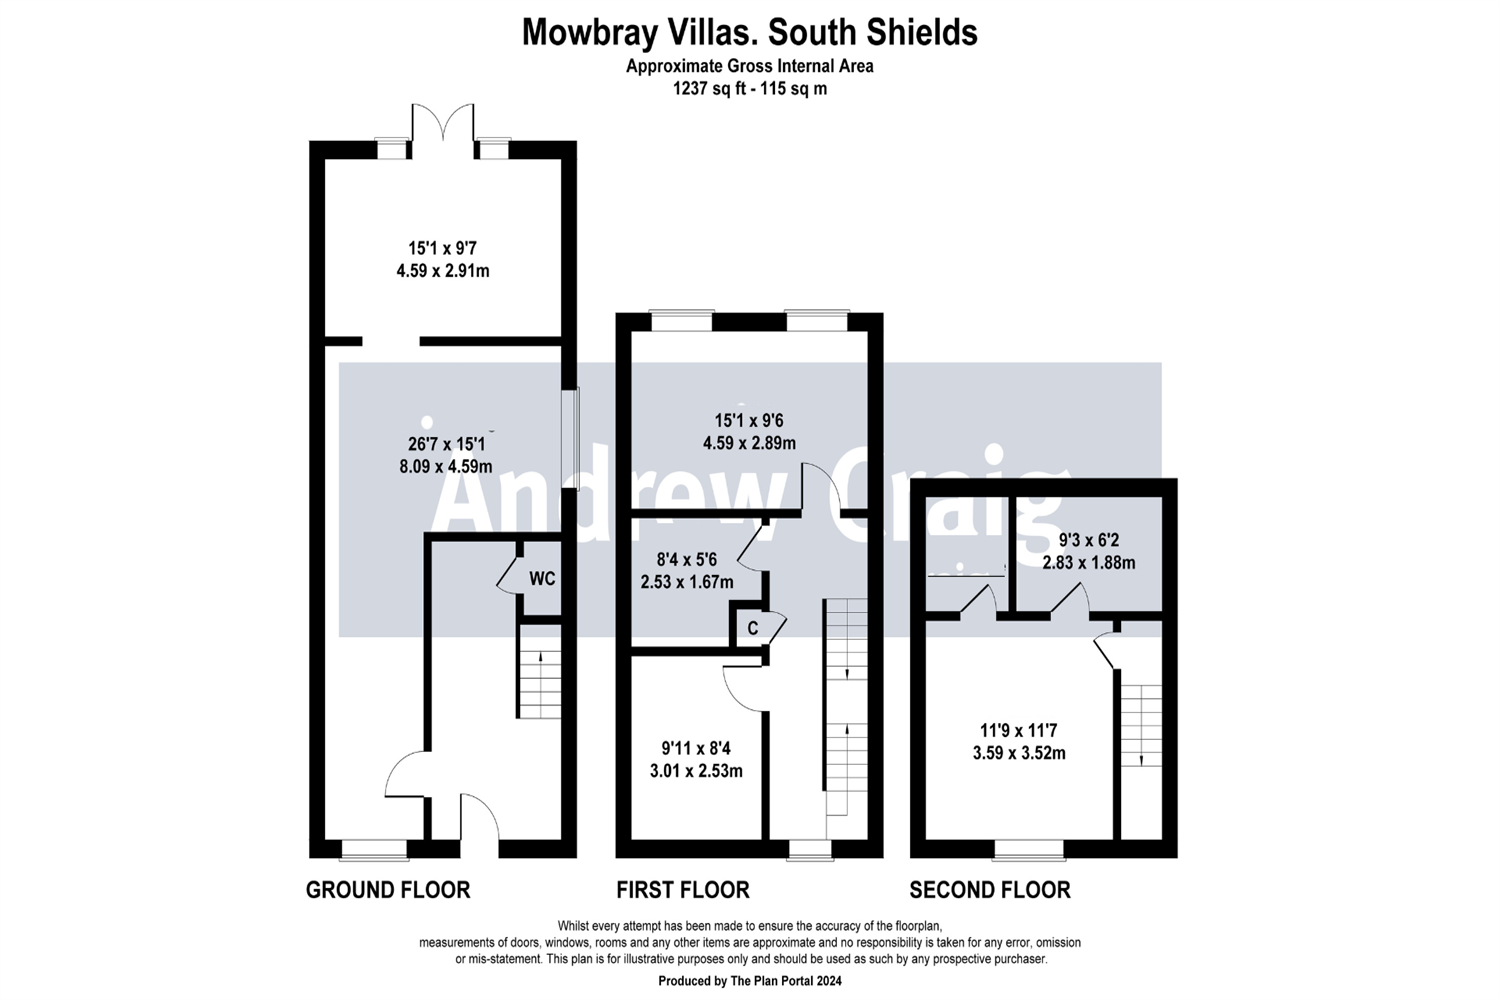 3 bed end of terrace house for sale in Mowbray Villas, South Shields - Property floorplan